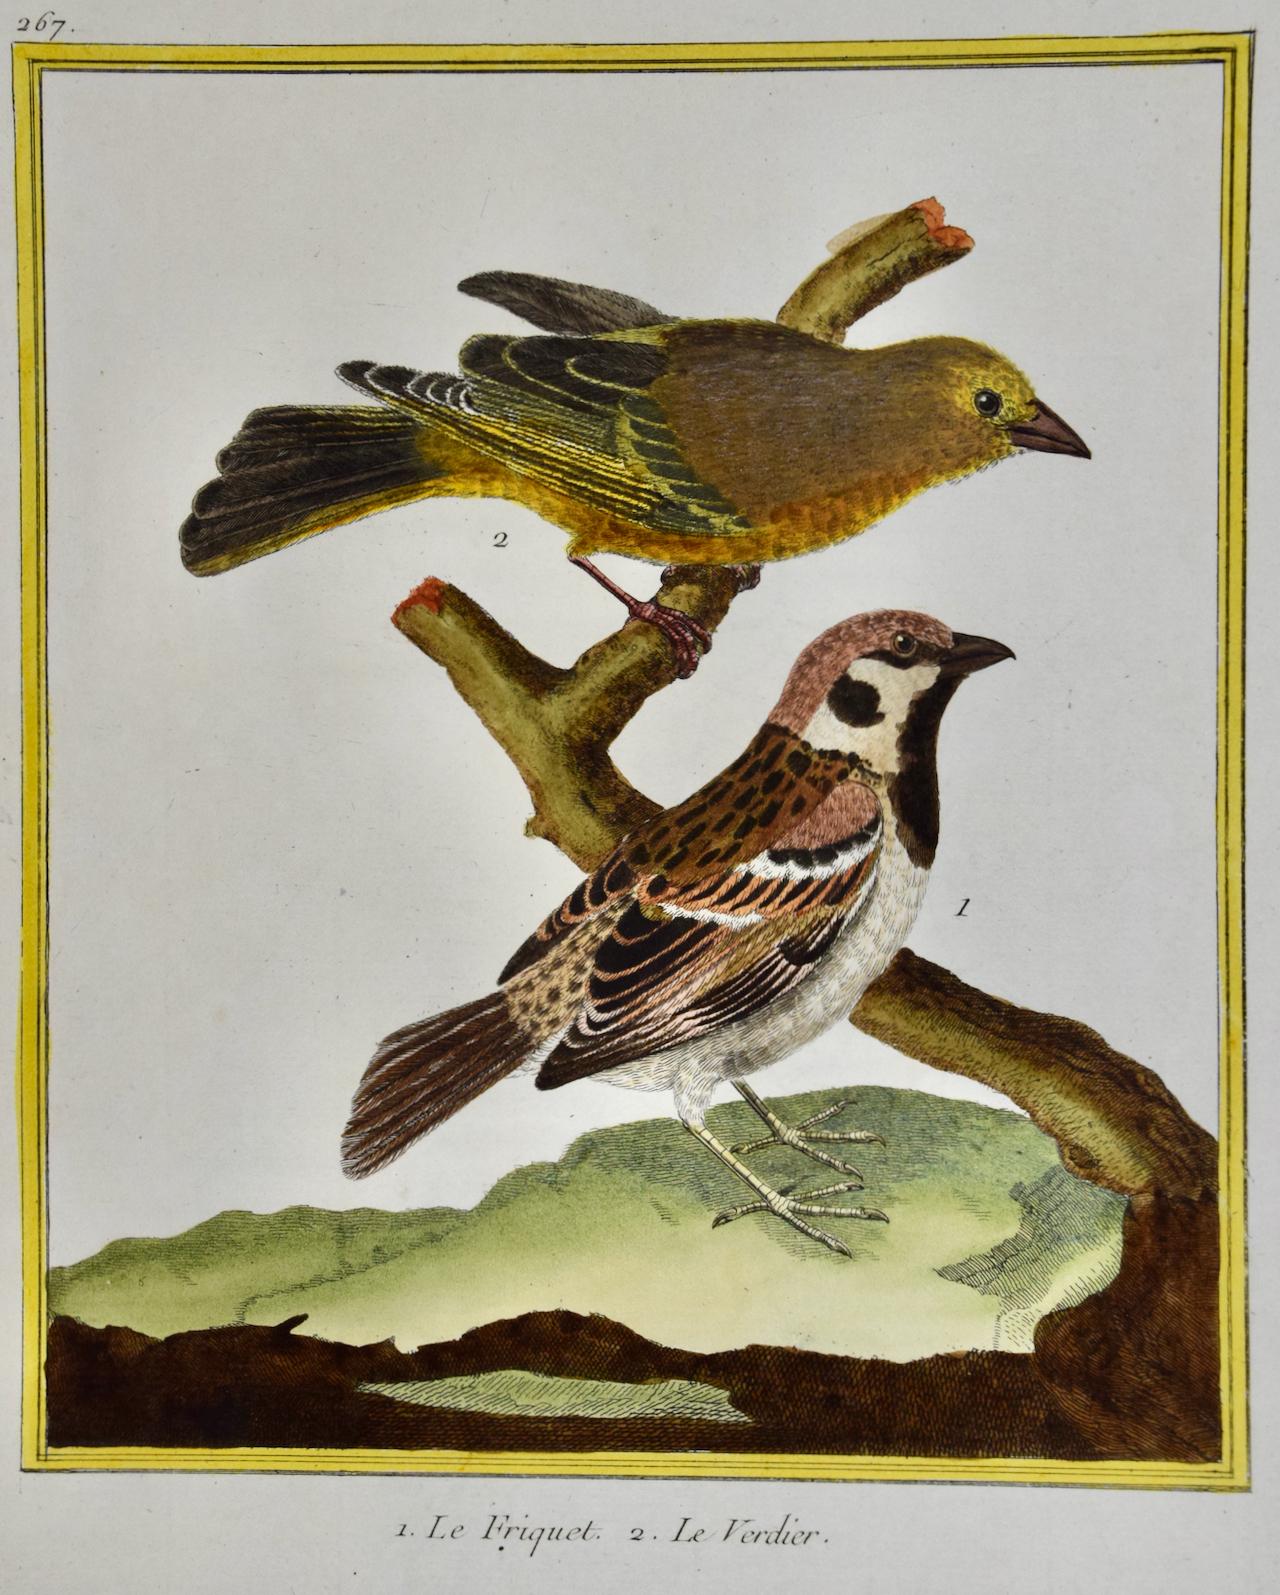 Francois Nicolas Martinet Animal Print - A Greenfinch & A Sparrow: An 18th Century Hand-colored Engraving by Martinet